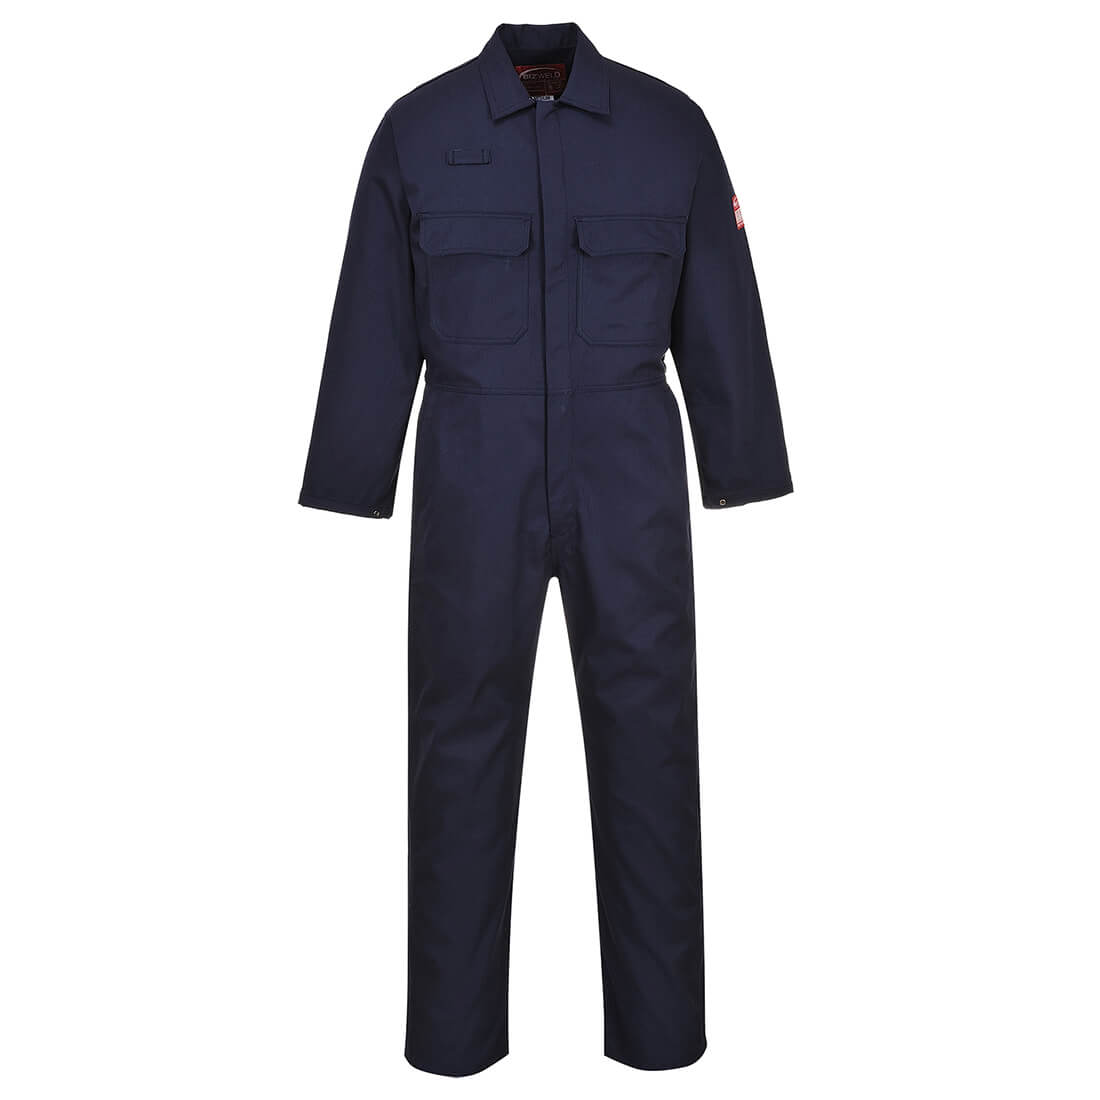 Image of Biz Weld Mens Flame Resistant Overall Navy Blue 4XL 34"